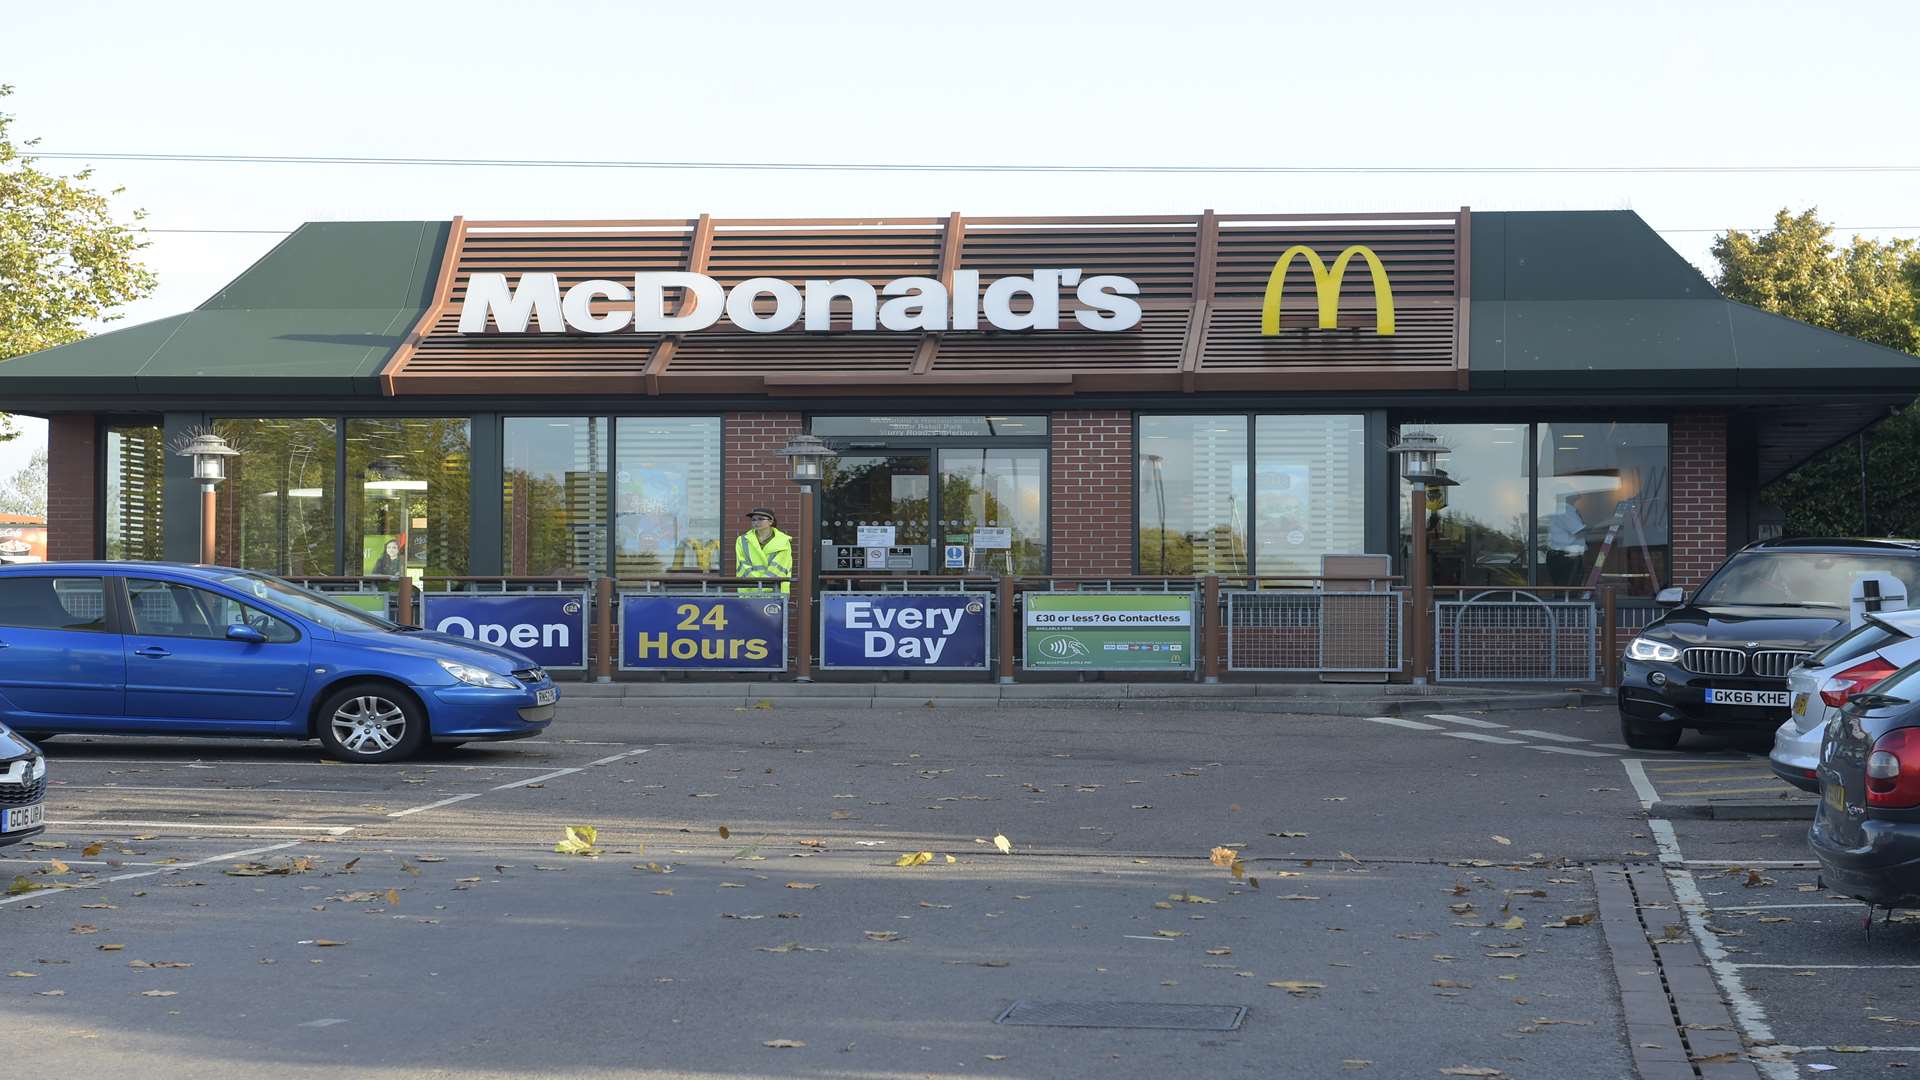 The McDonald's restaurant at Sturry Road is currently closed but the drive-thru remains open